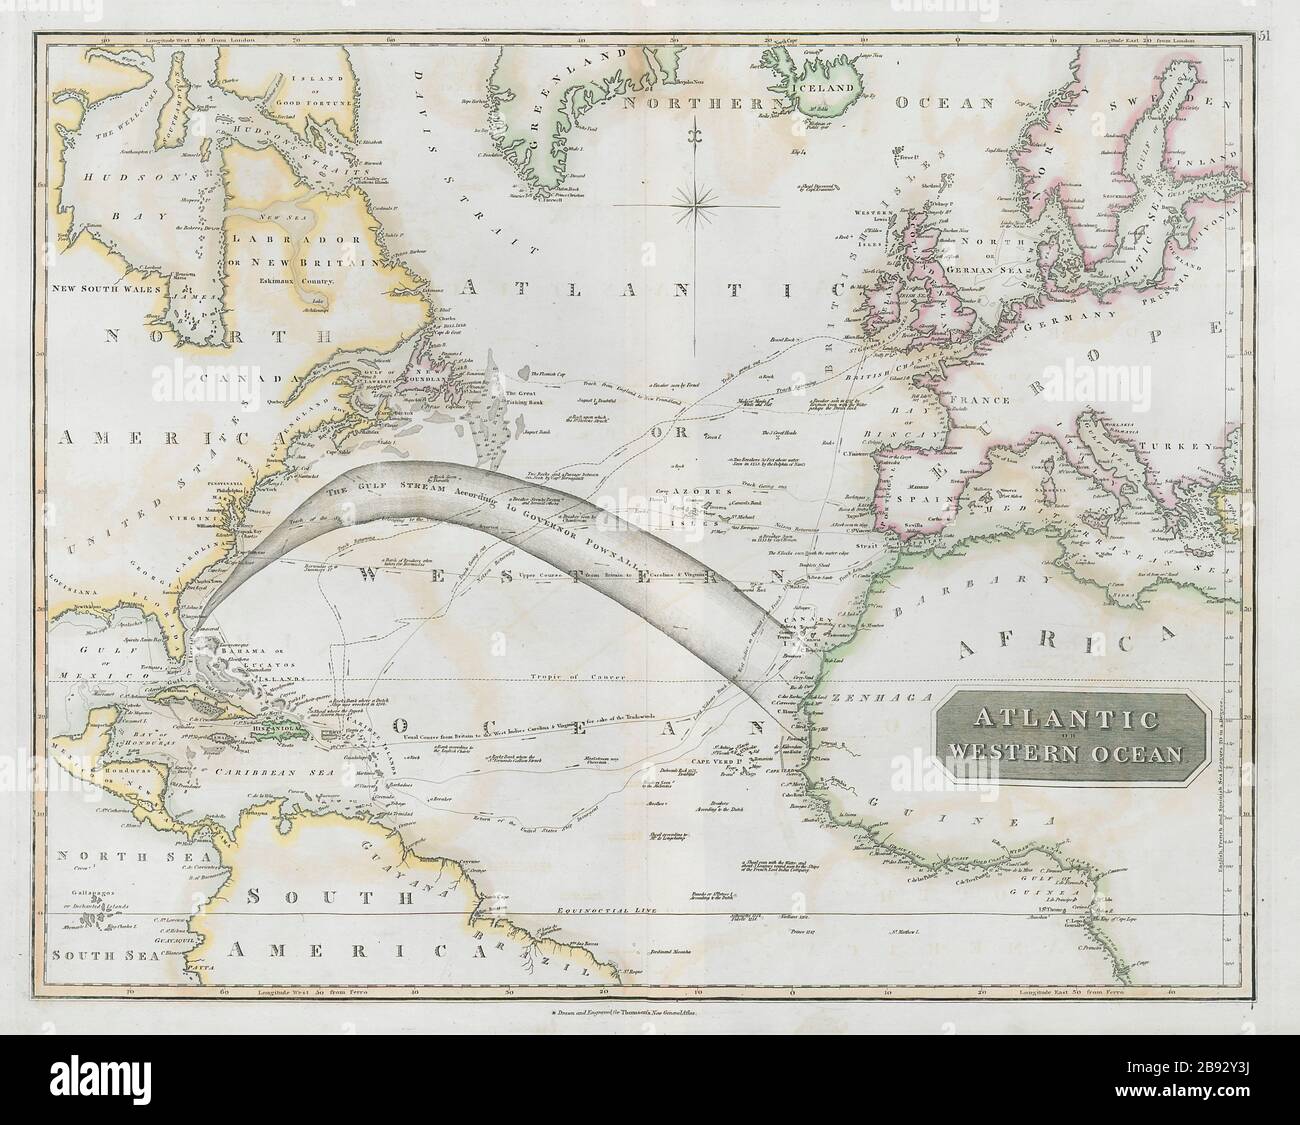 Atlantic or Western Ocean. Gulf Stream, Nelson's & trade routes THOMSON 1830 map Stock Photo